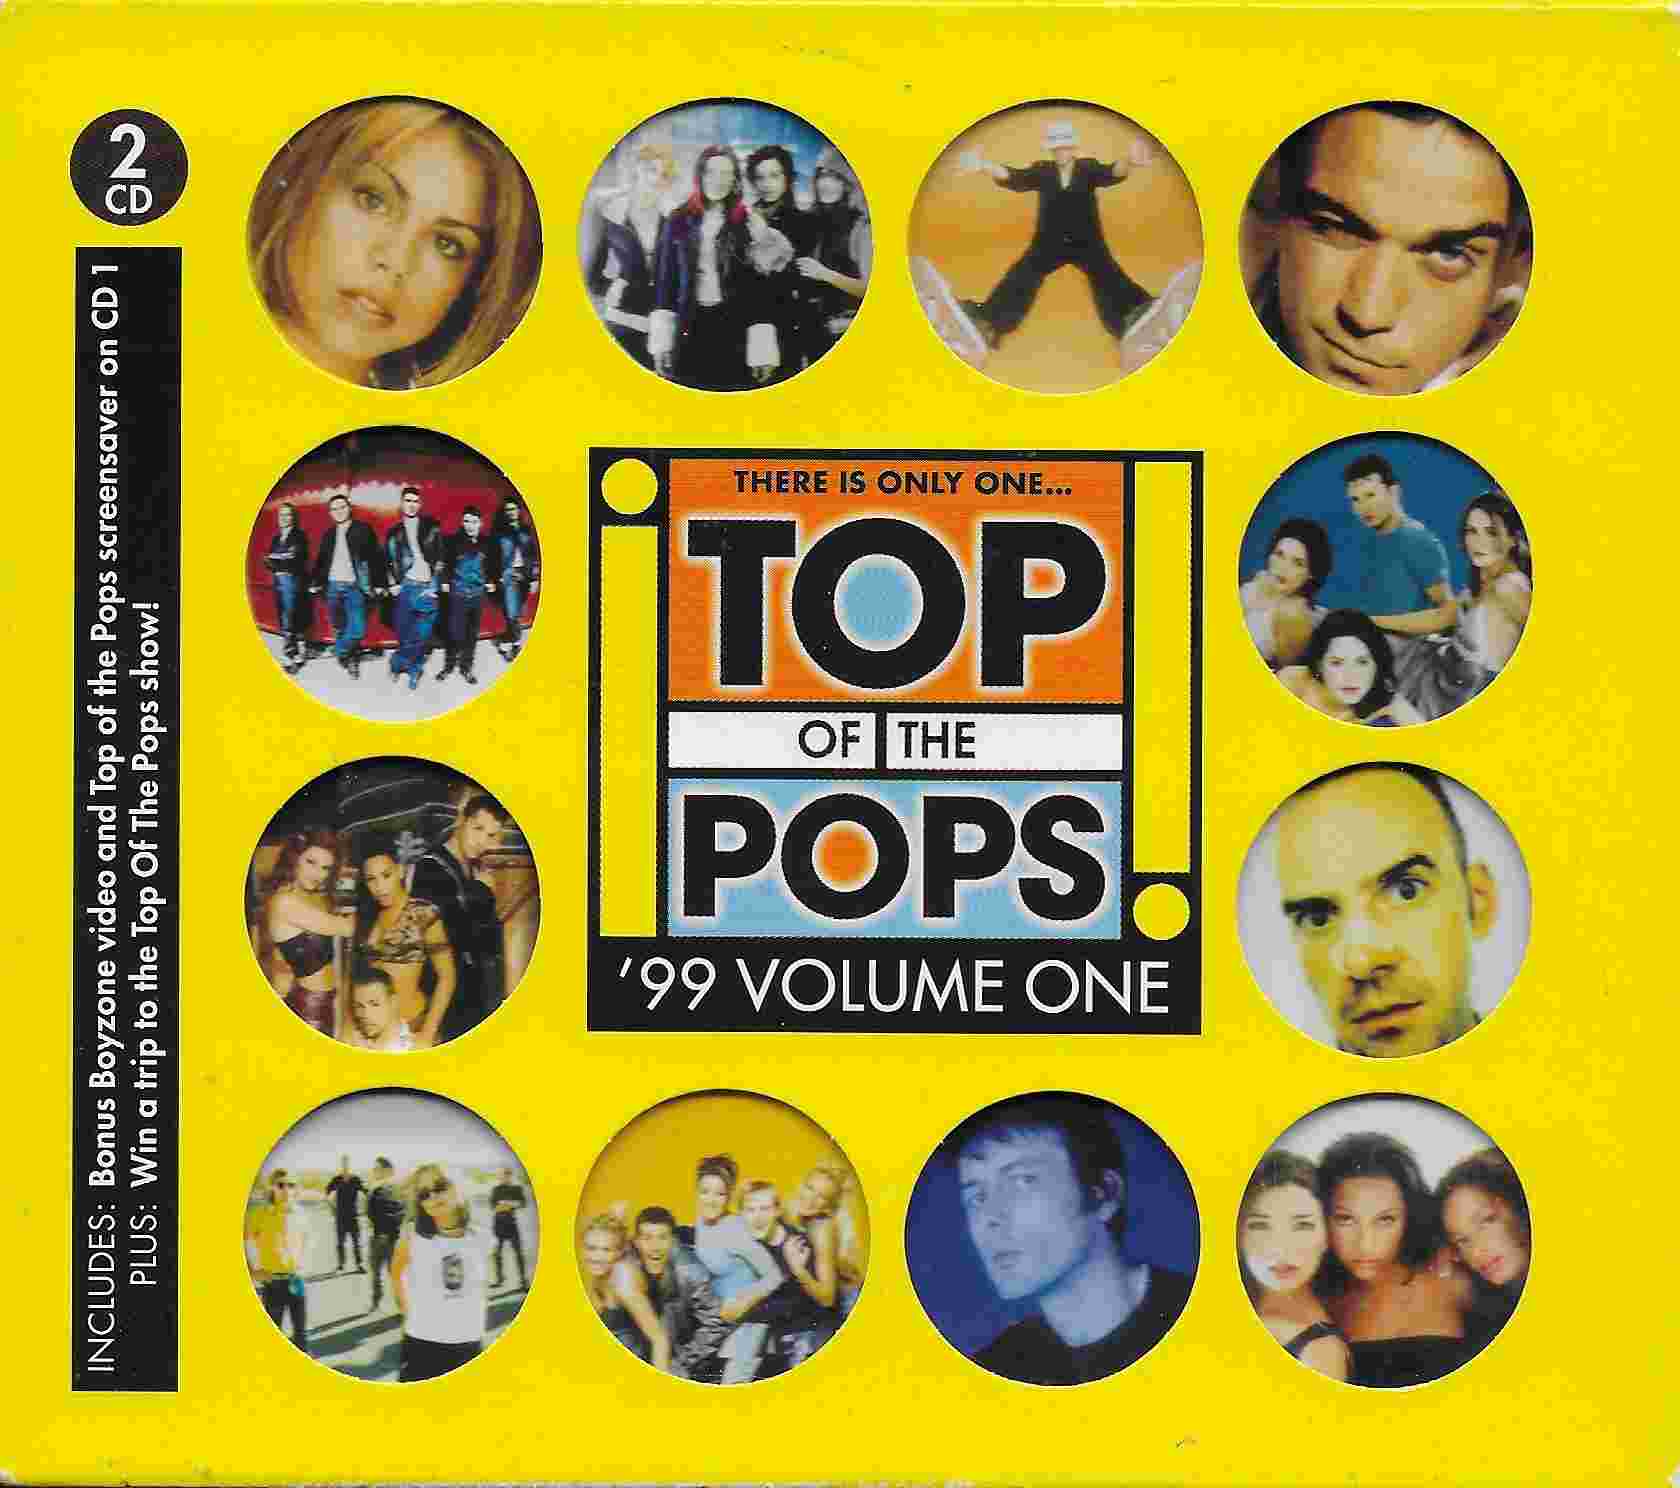 Picture of 564459 - 2 Top of the pops 99 - Volume 1 by artist Various 